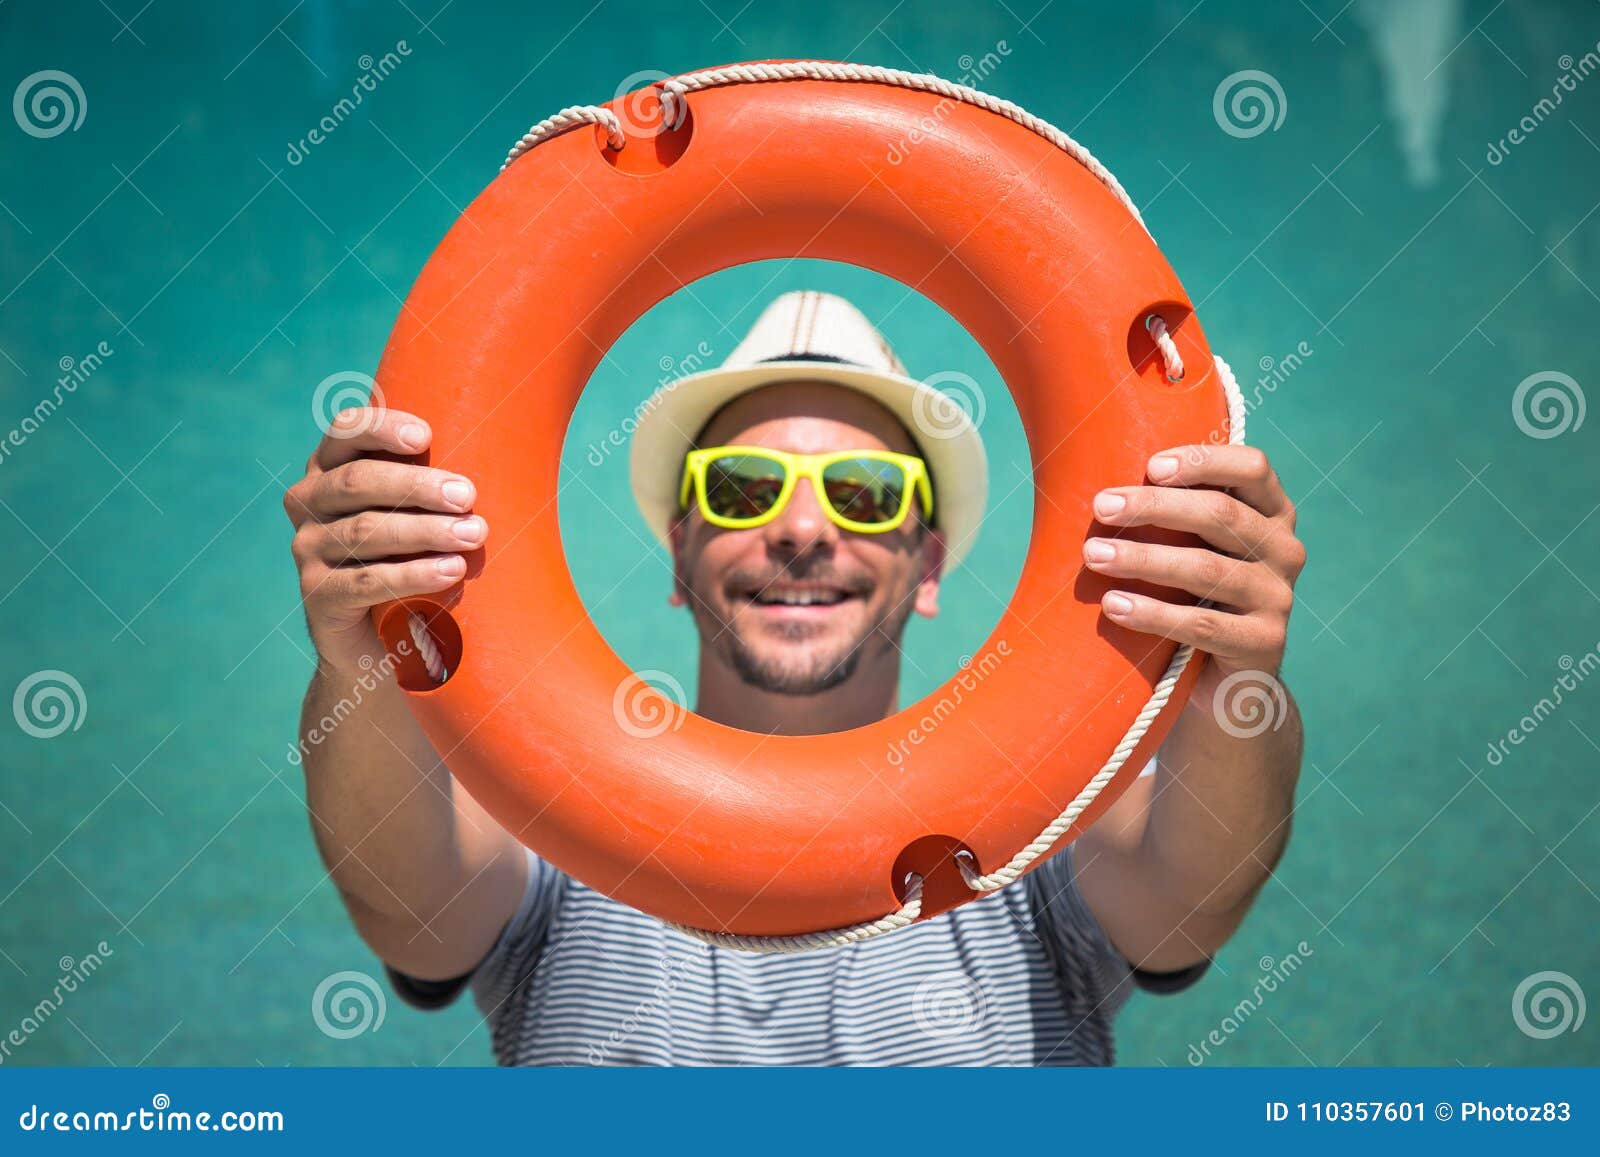 Tourist Guy Holding Lifebuoy Against Blue Swimming Pool Water Surface ...